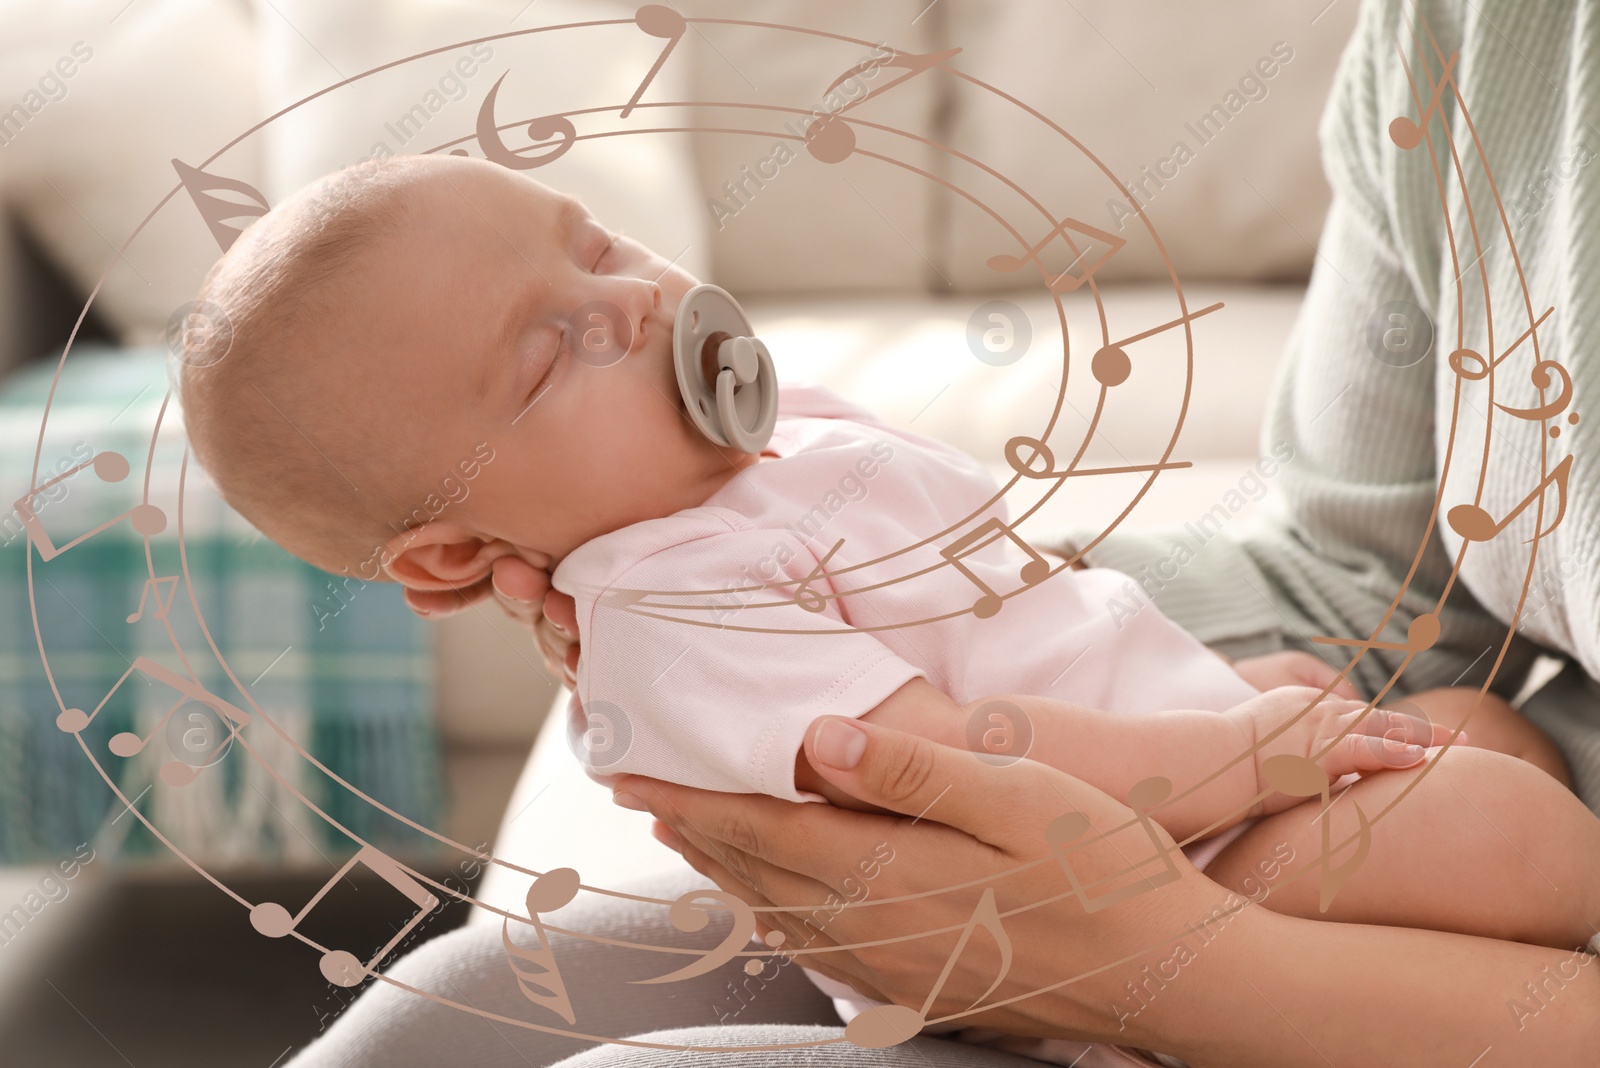 Image of Mother singing lullaby to her sleepy baby at home, closeup. Music notes illustrations flying around woman and child